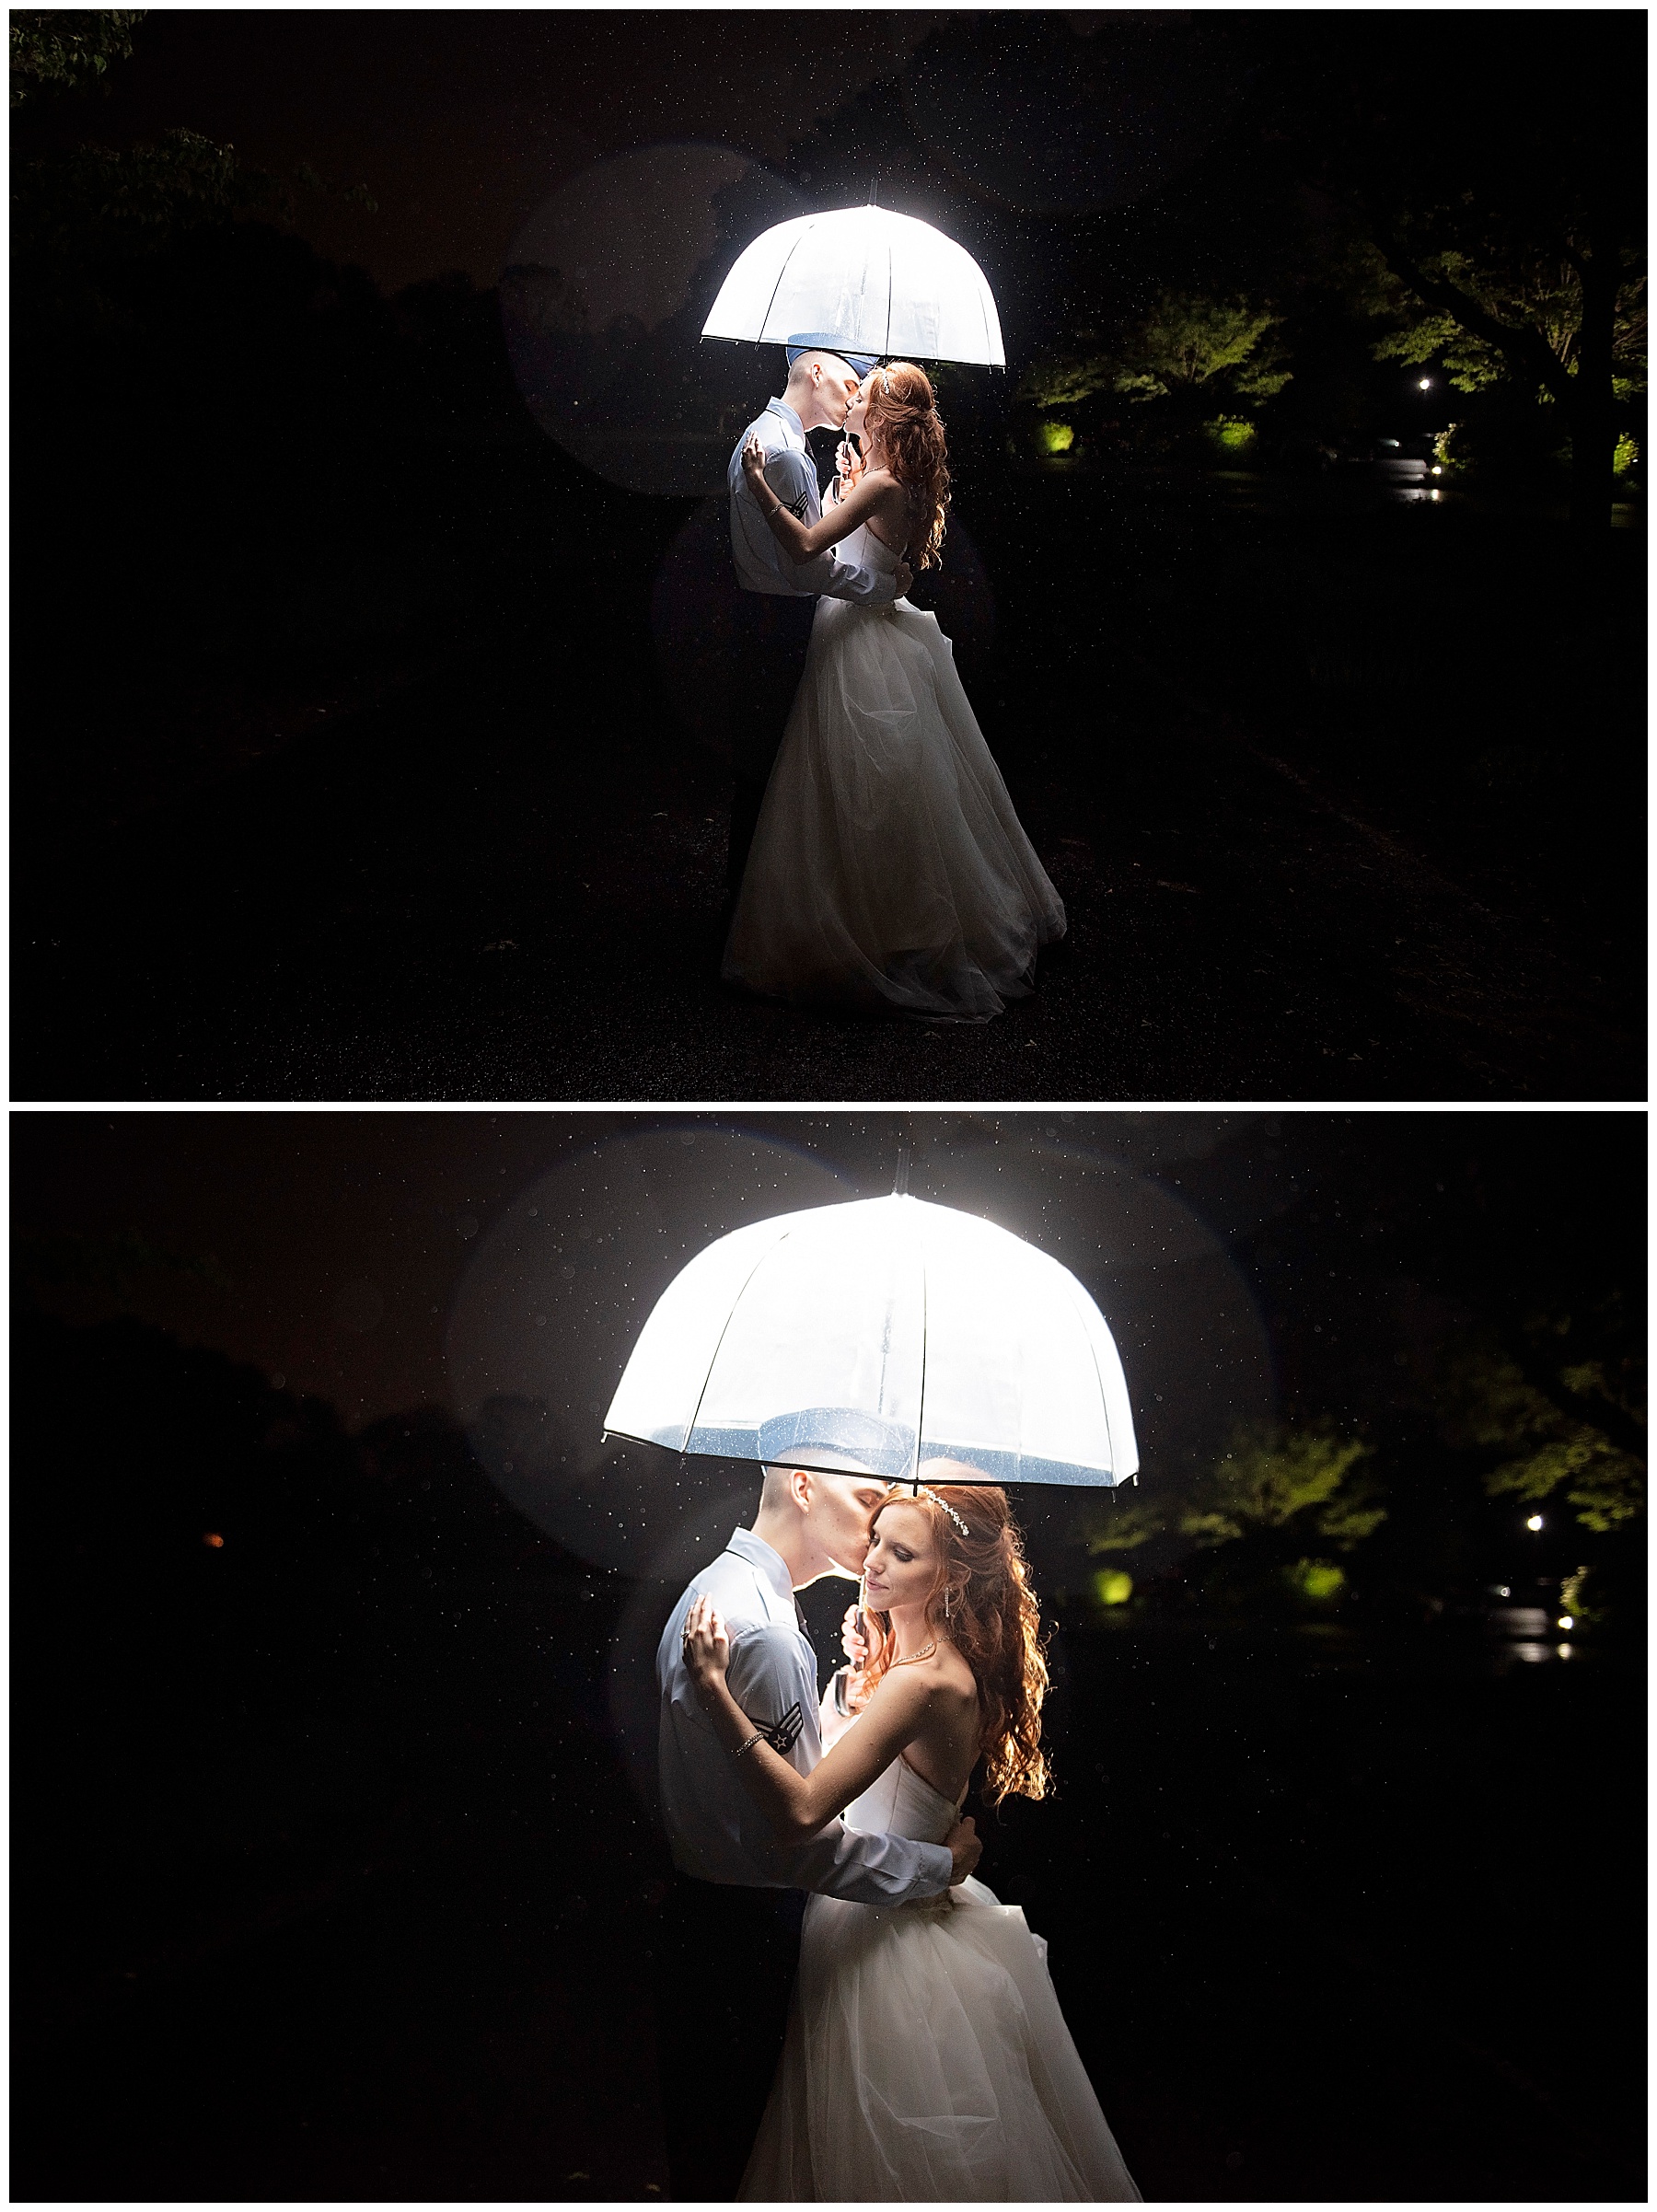 Rainy Night Portraits at the Outdoor Country Club